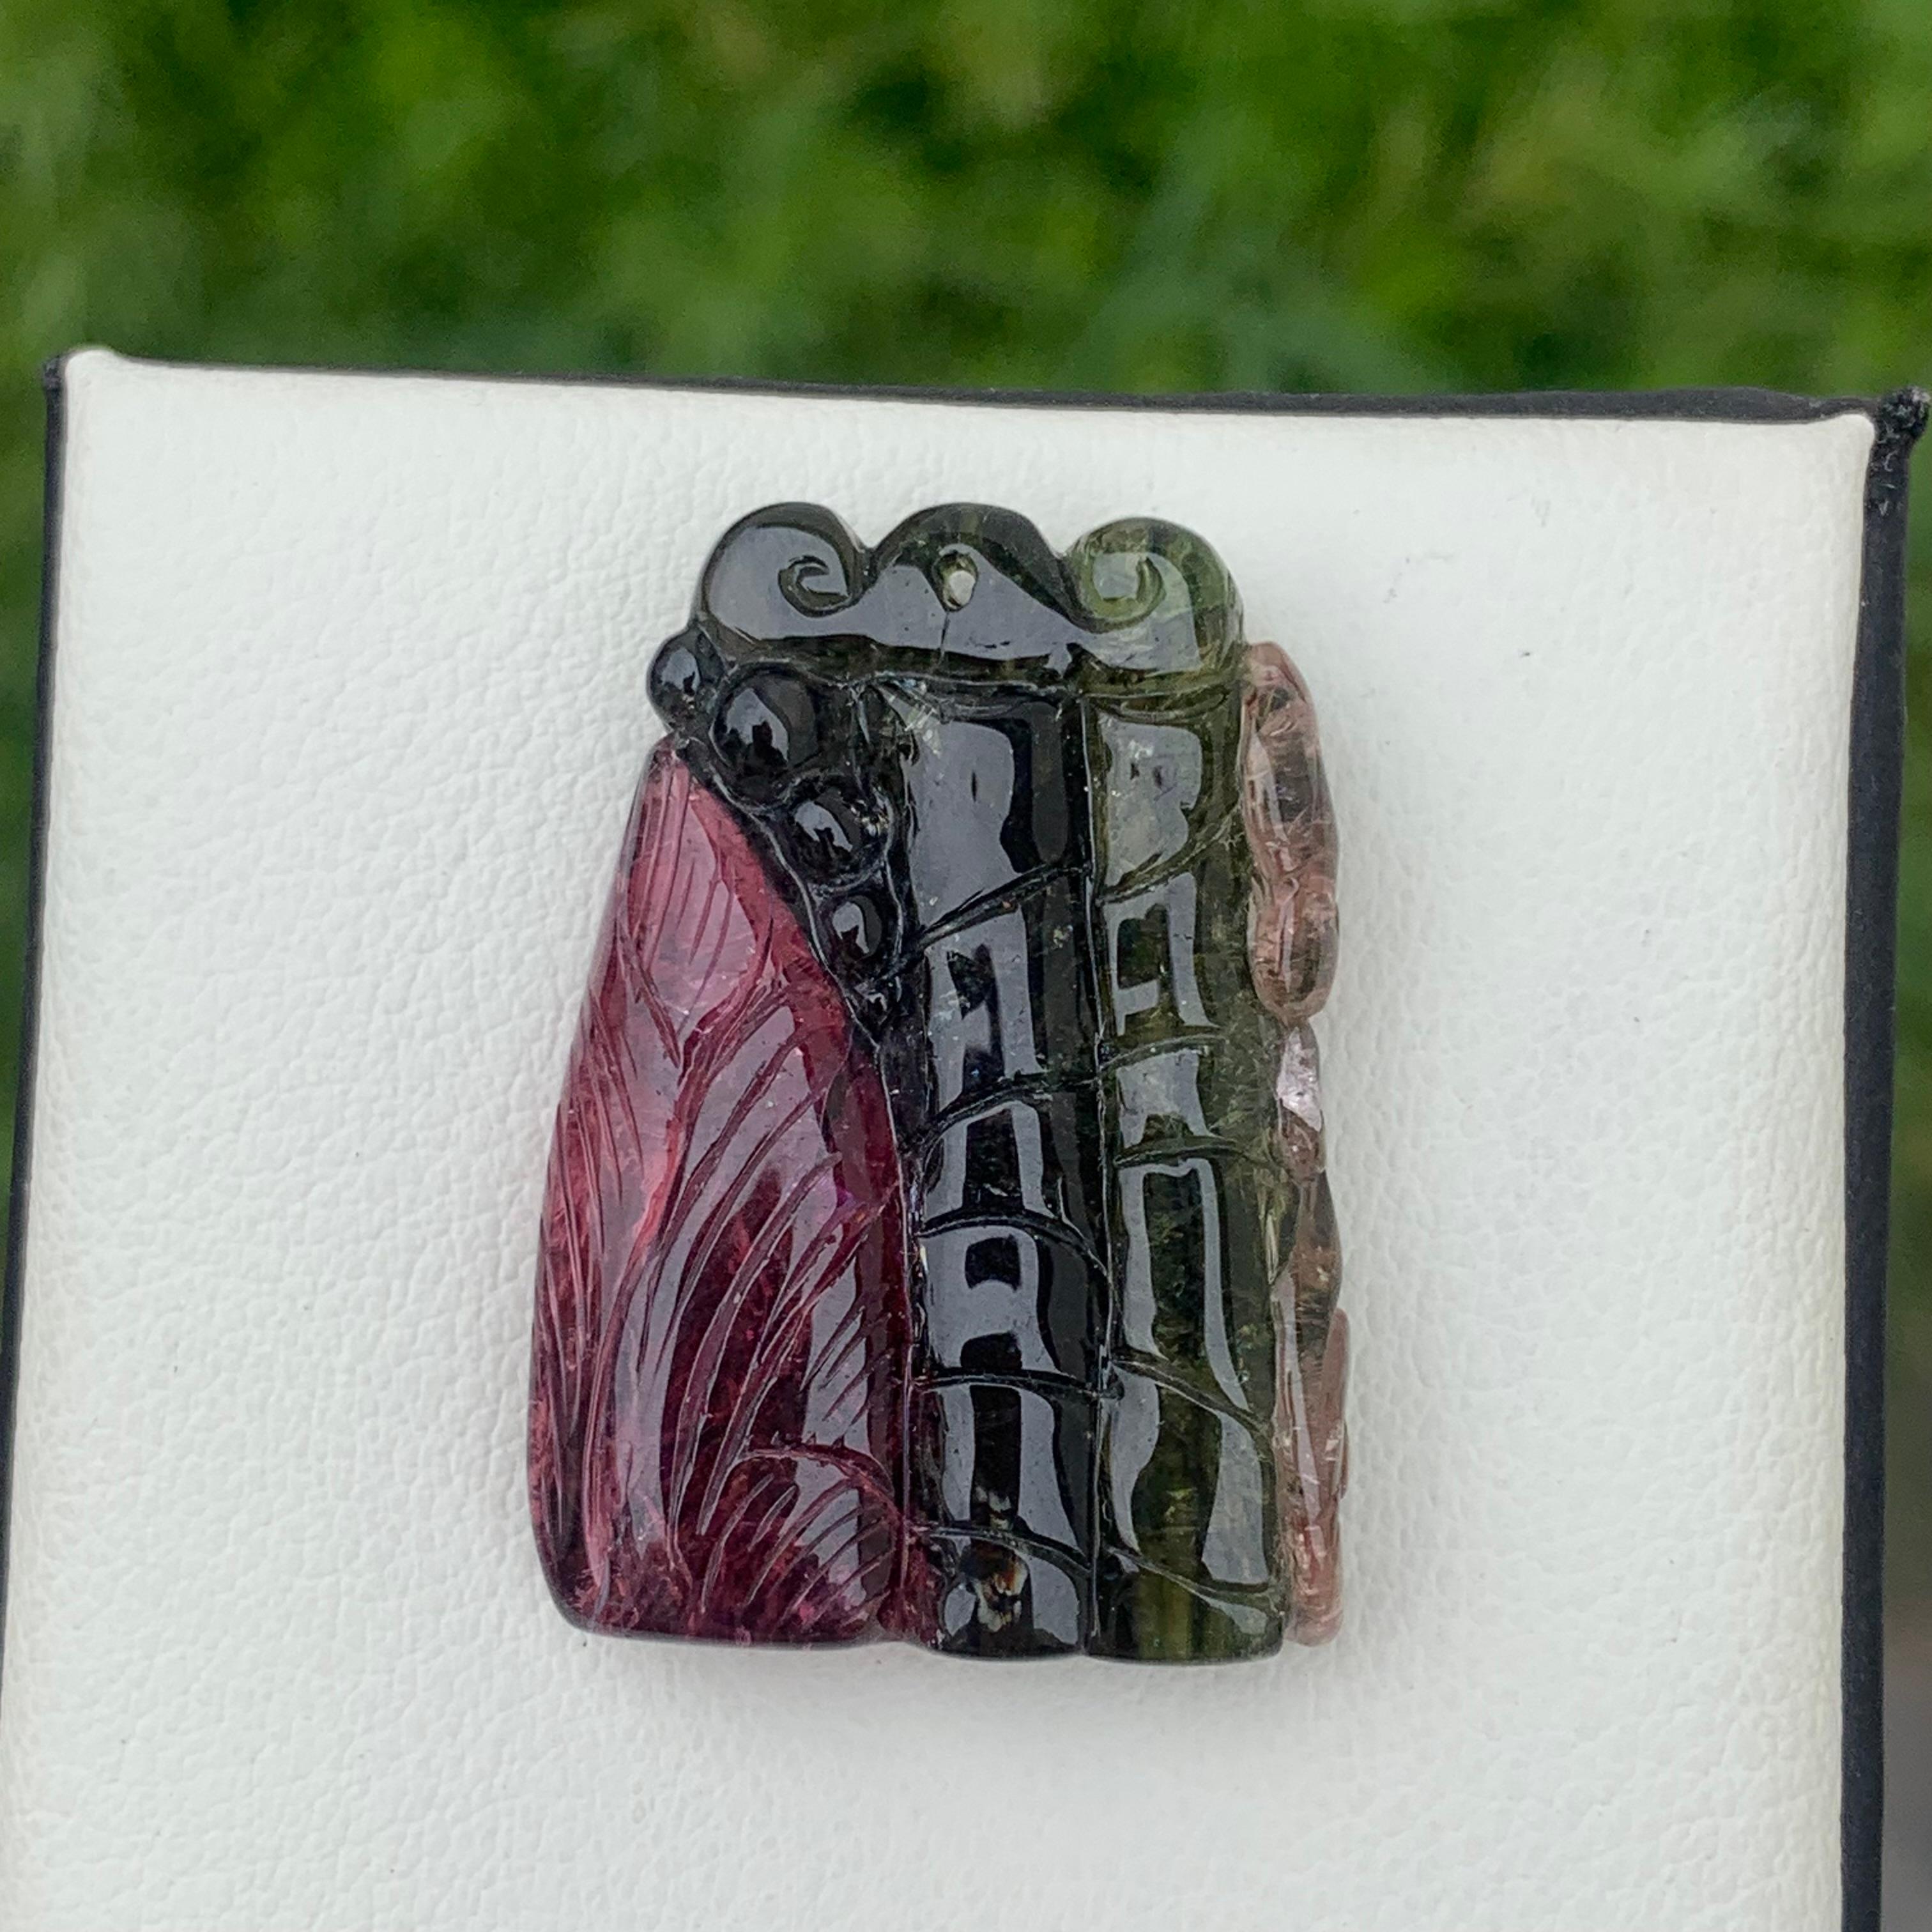 67.05 carat gorgeous tri-color tourmaline drilled carving from Africa
Weight: 67.05 Carats
Dimension: 3.5 x 2.4 x 0.8 Cm
Origin: Africa
Color: Red Pink and Green
Shape: Carving
Quality: AAA
Tourmaline helps to create a shield around a person or room